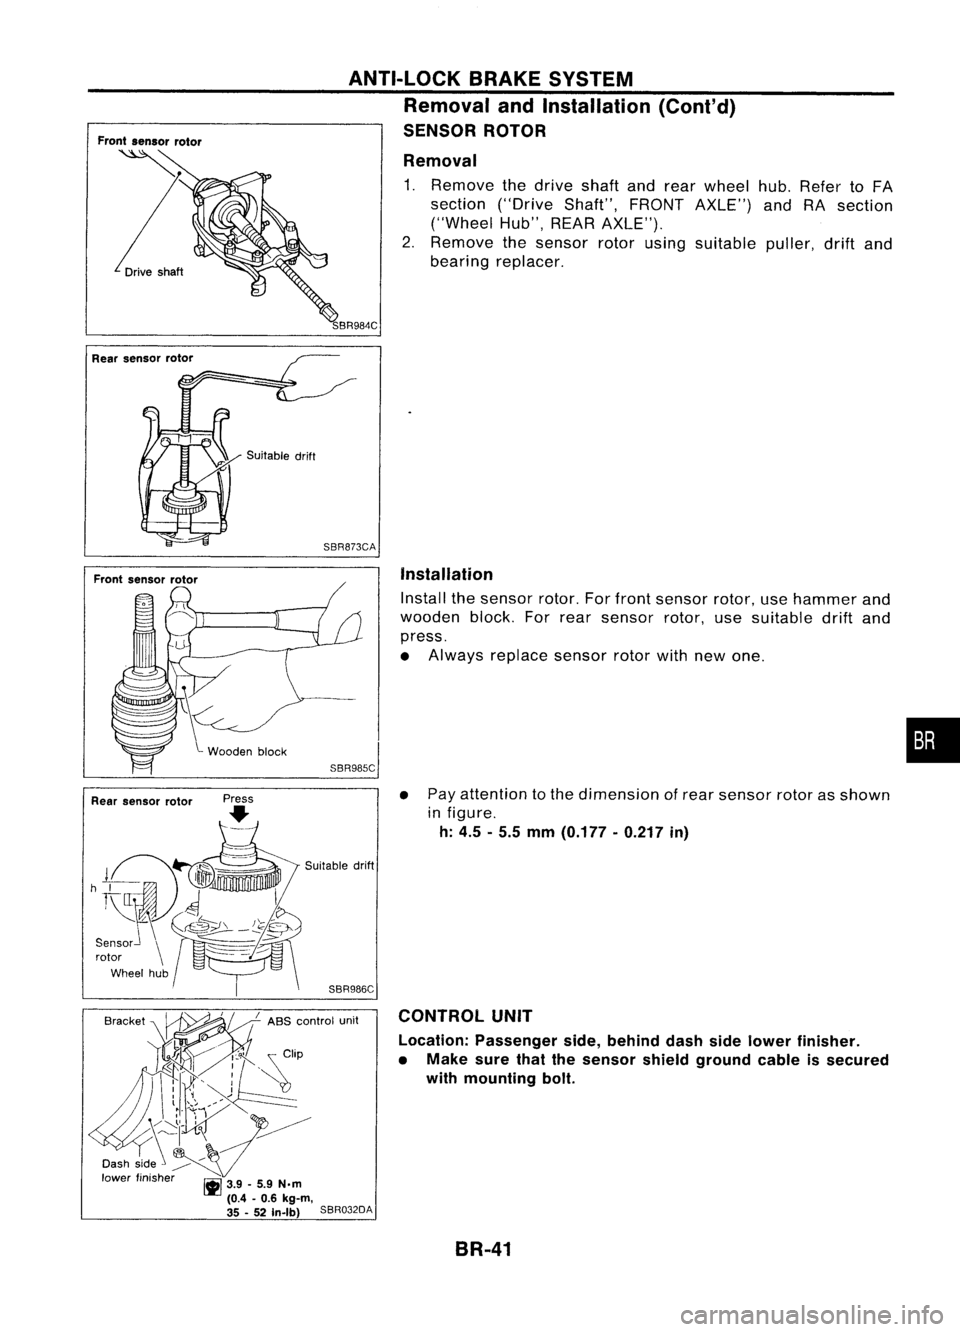 NISSAN ALMERA N15 1995  Service Manual ANTI-LOCKBRAKESYSTEM

Removal andInstallation (Cont'd)

SENSOR ROTOR

Removal 
1. Remove thedrive shaftandrear wheel hub.Refer toFA
section ("DriveShaft",FRONTAXLE") andRAsection
("